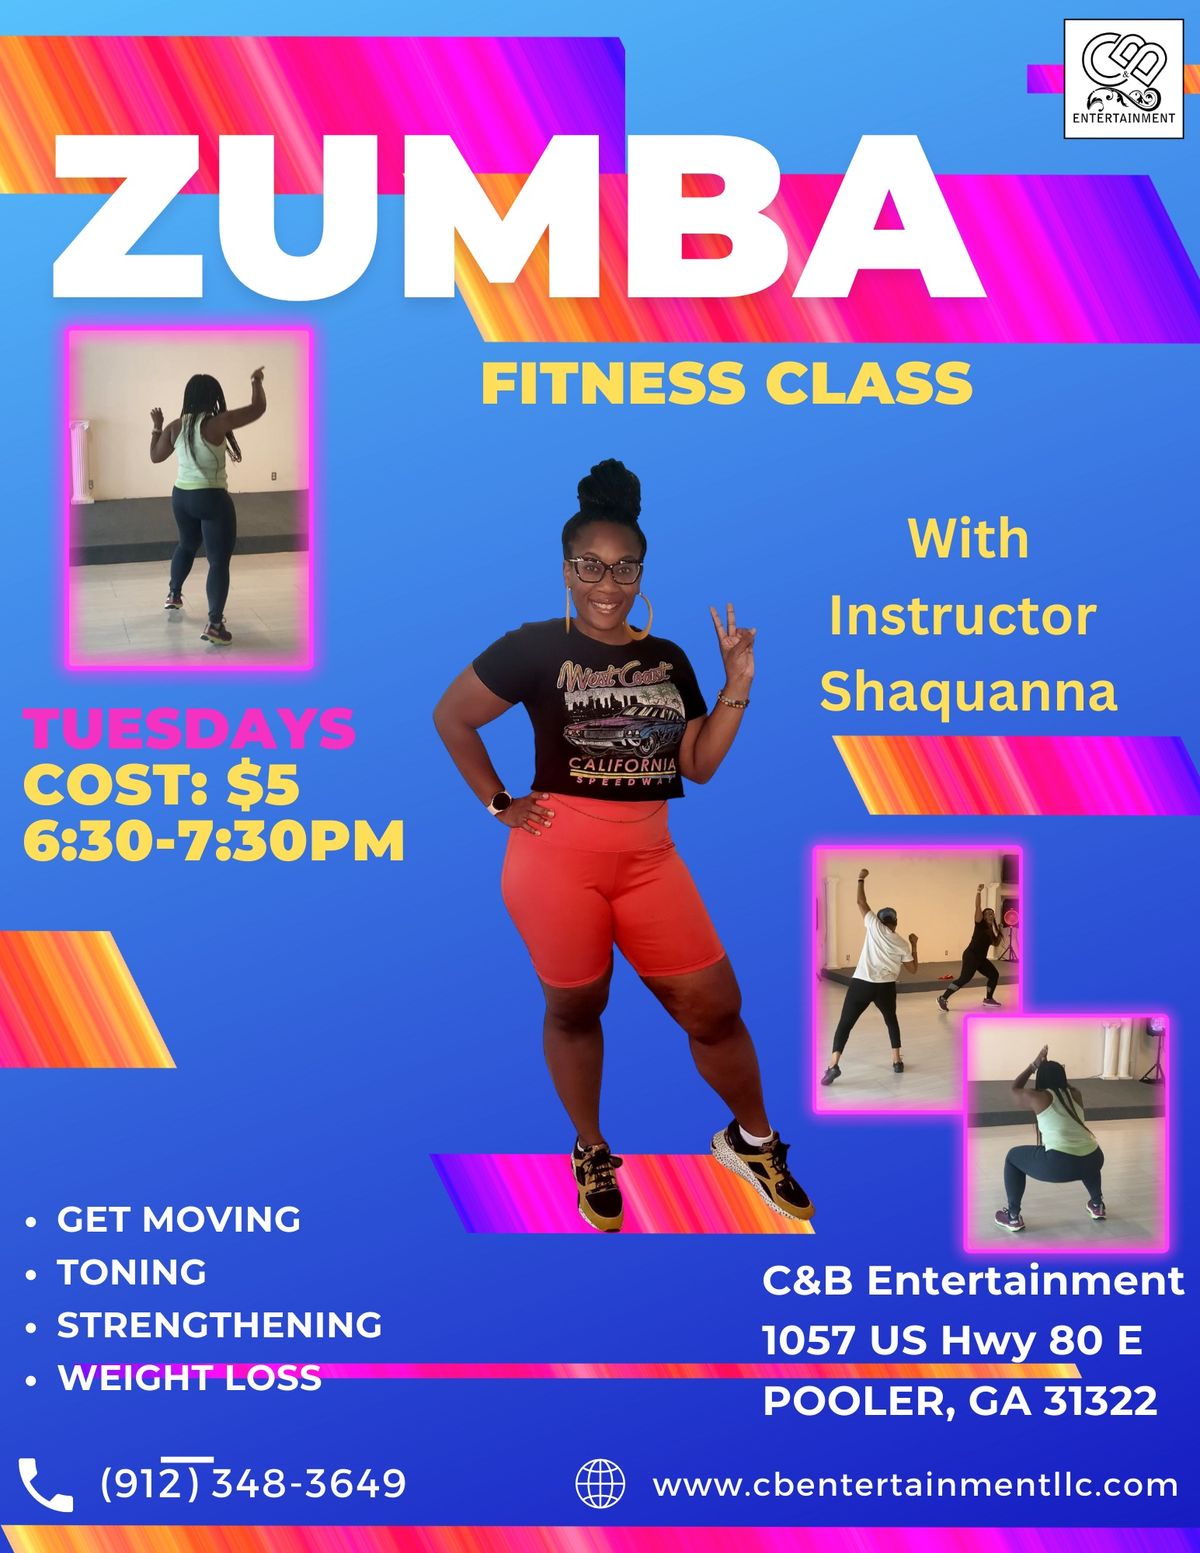 Zumba Fitness Class featuring Shaquanna